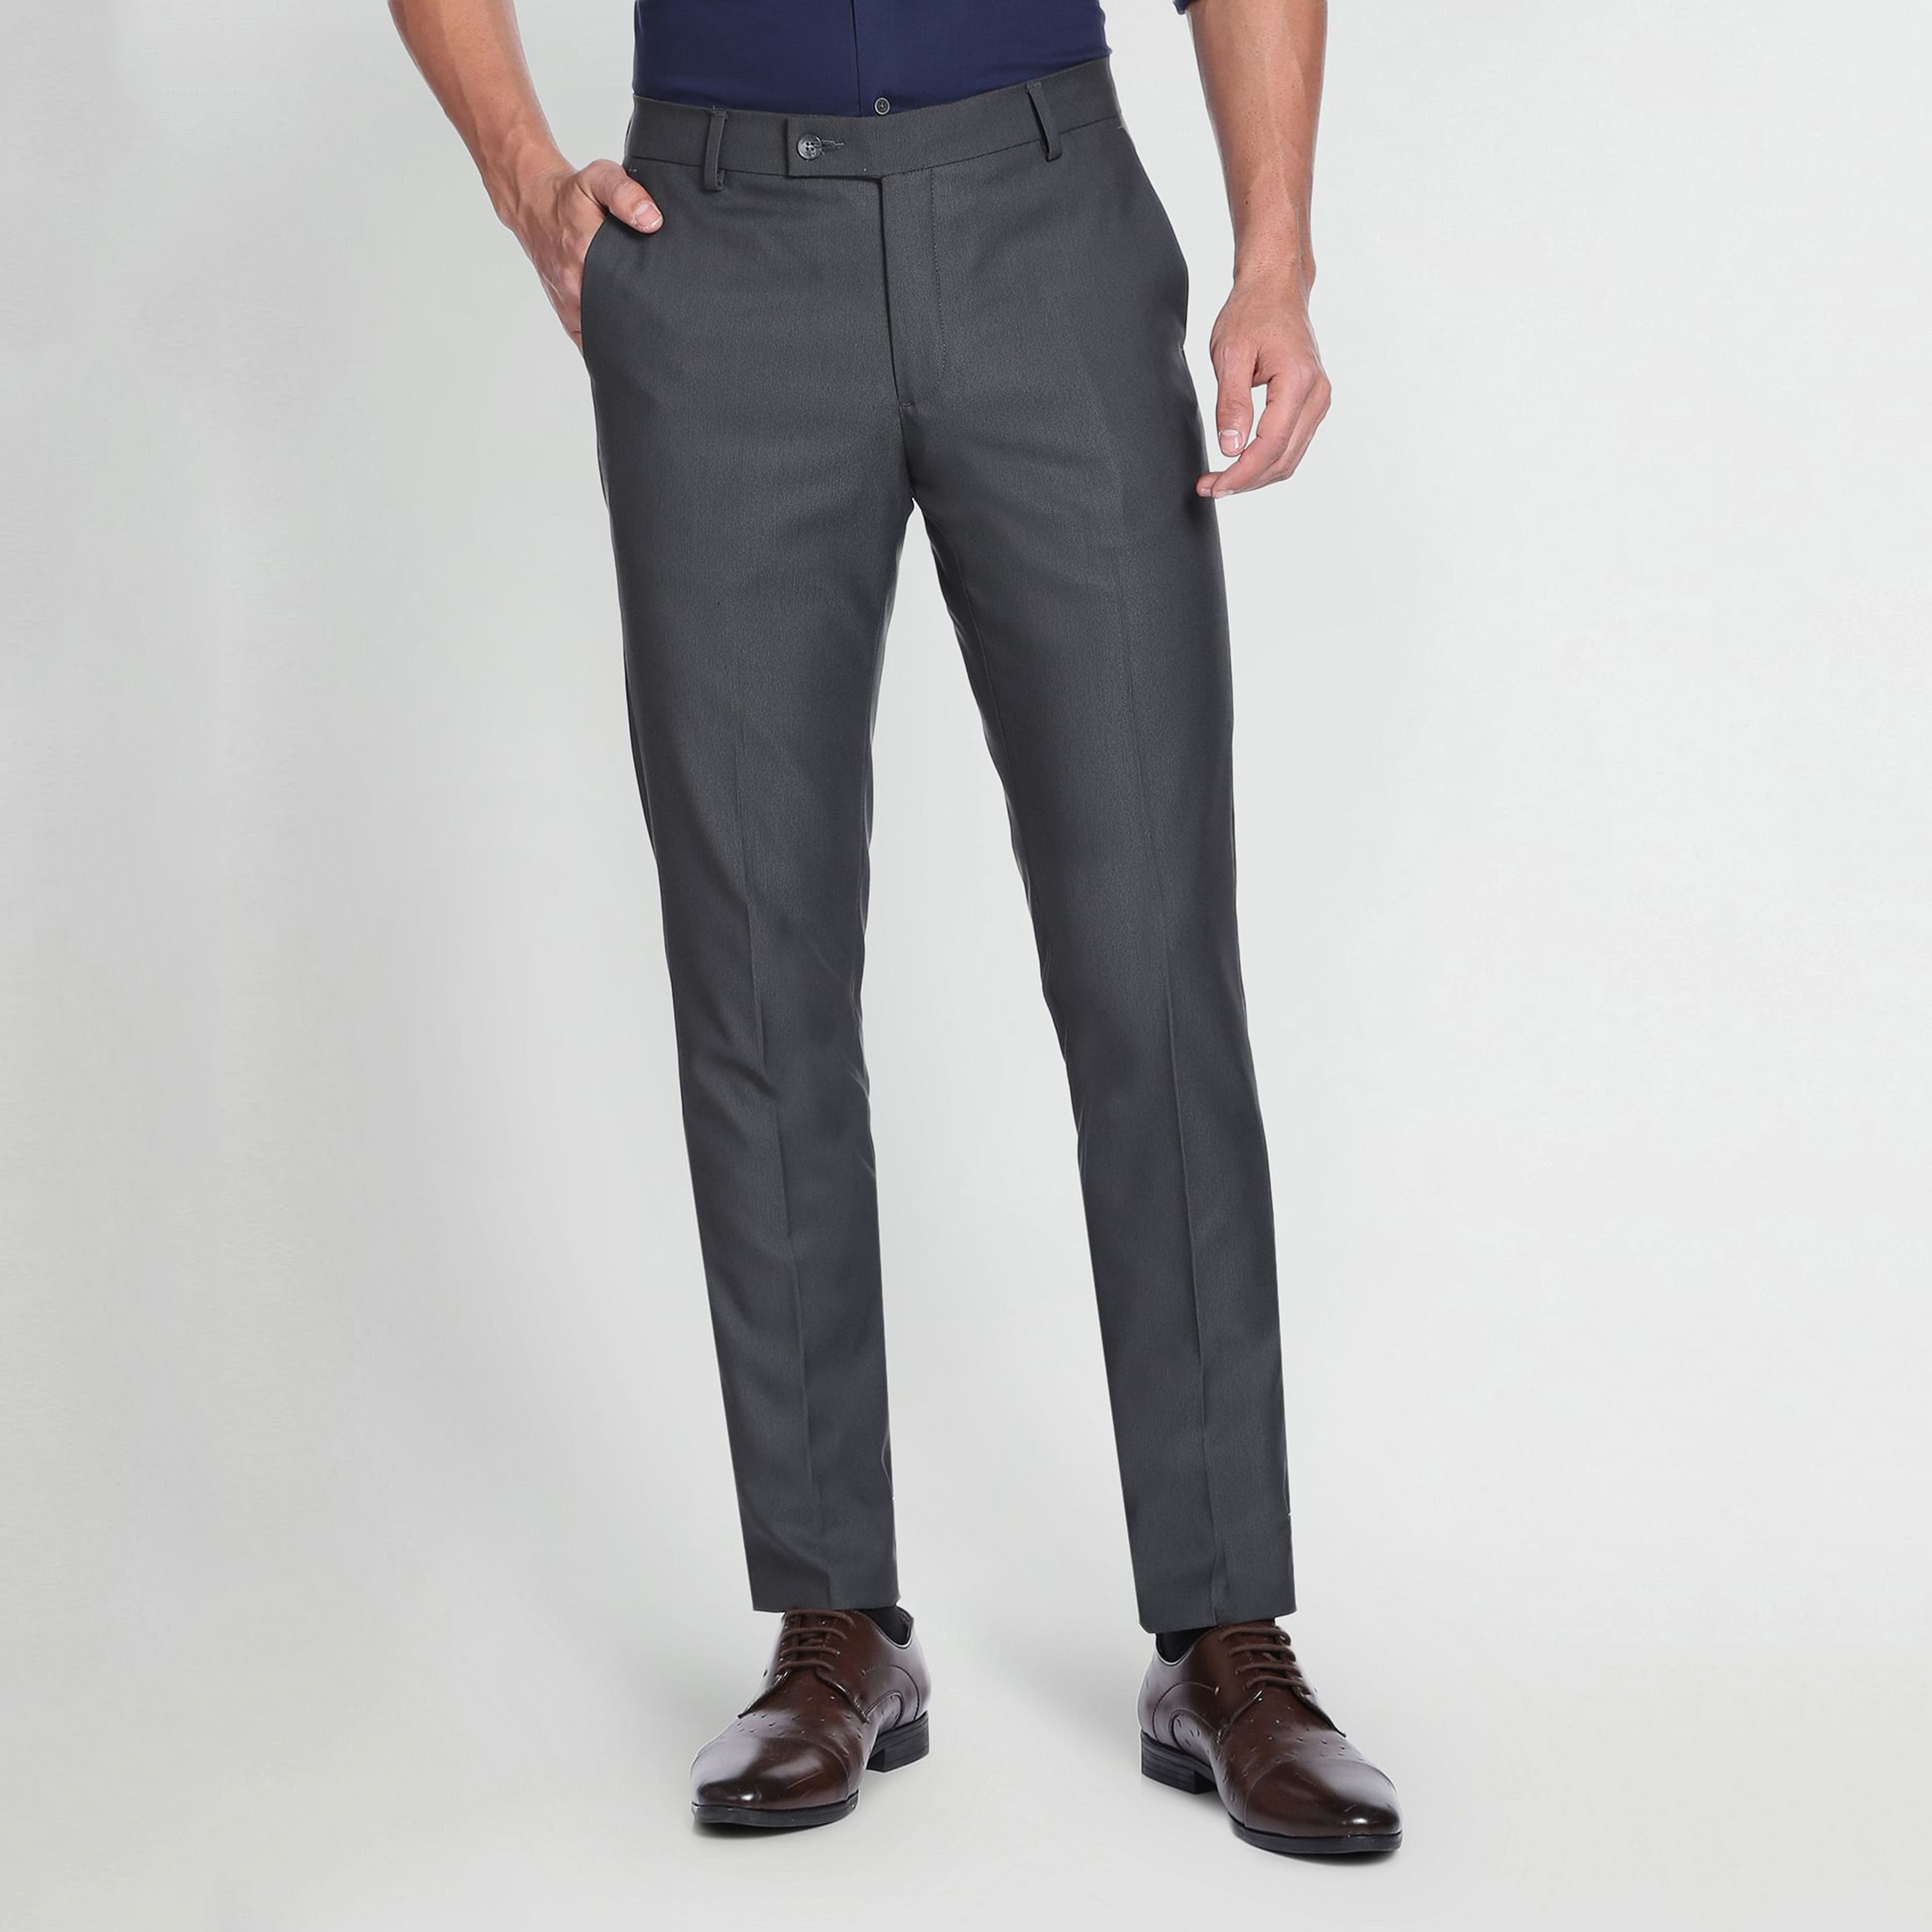 Buy Arrow Men's Regular Fit Formal Trousers (ARGT0255A_Navy_30) at Amazon.in